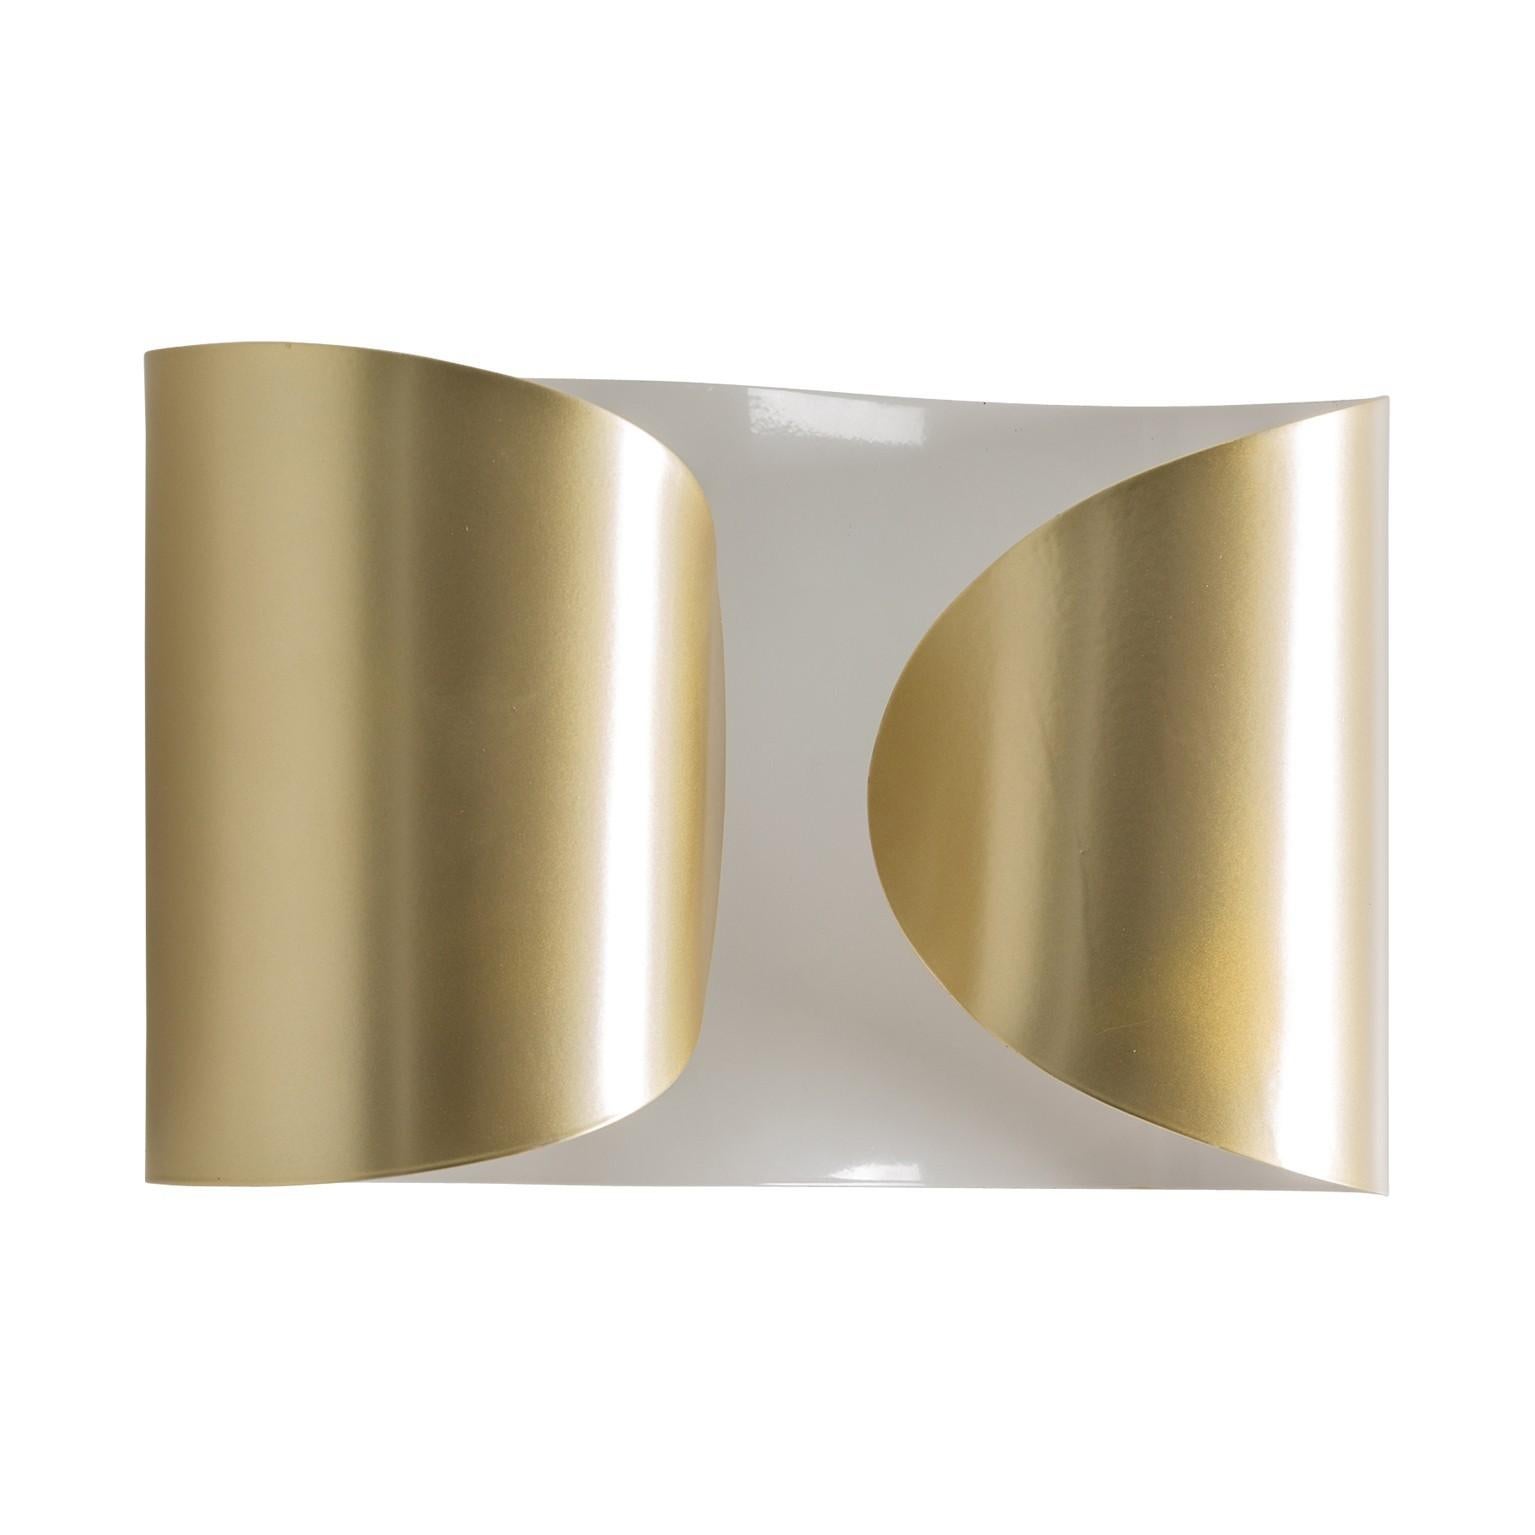 White lacquer and gold pair of wall lights.